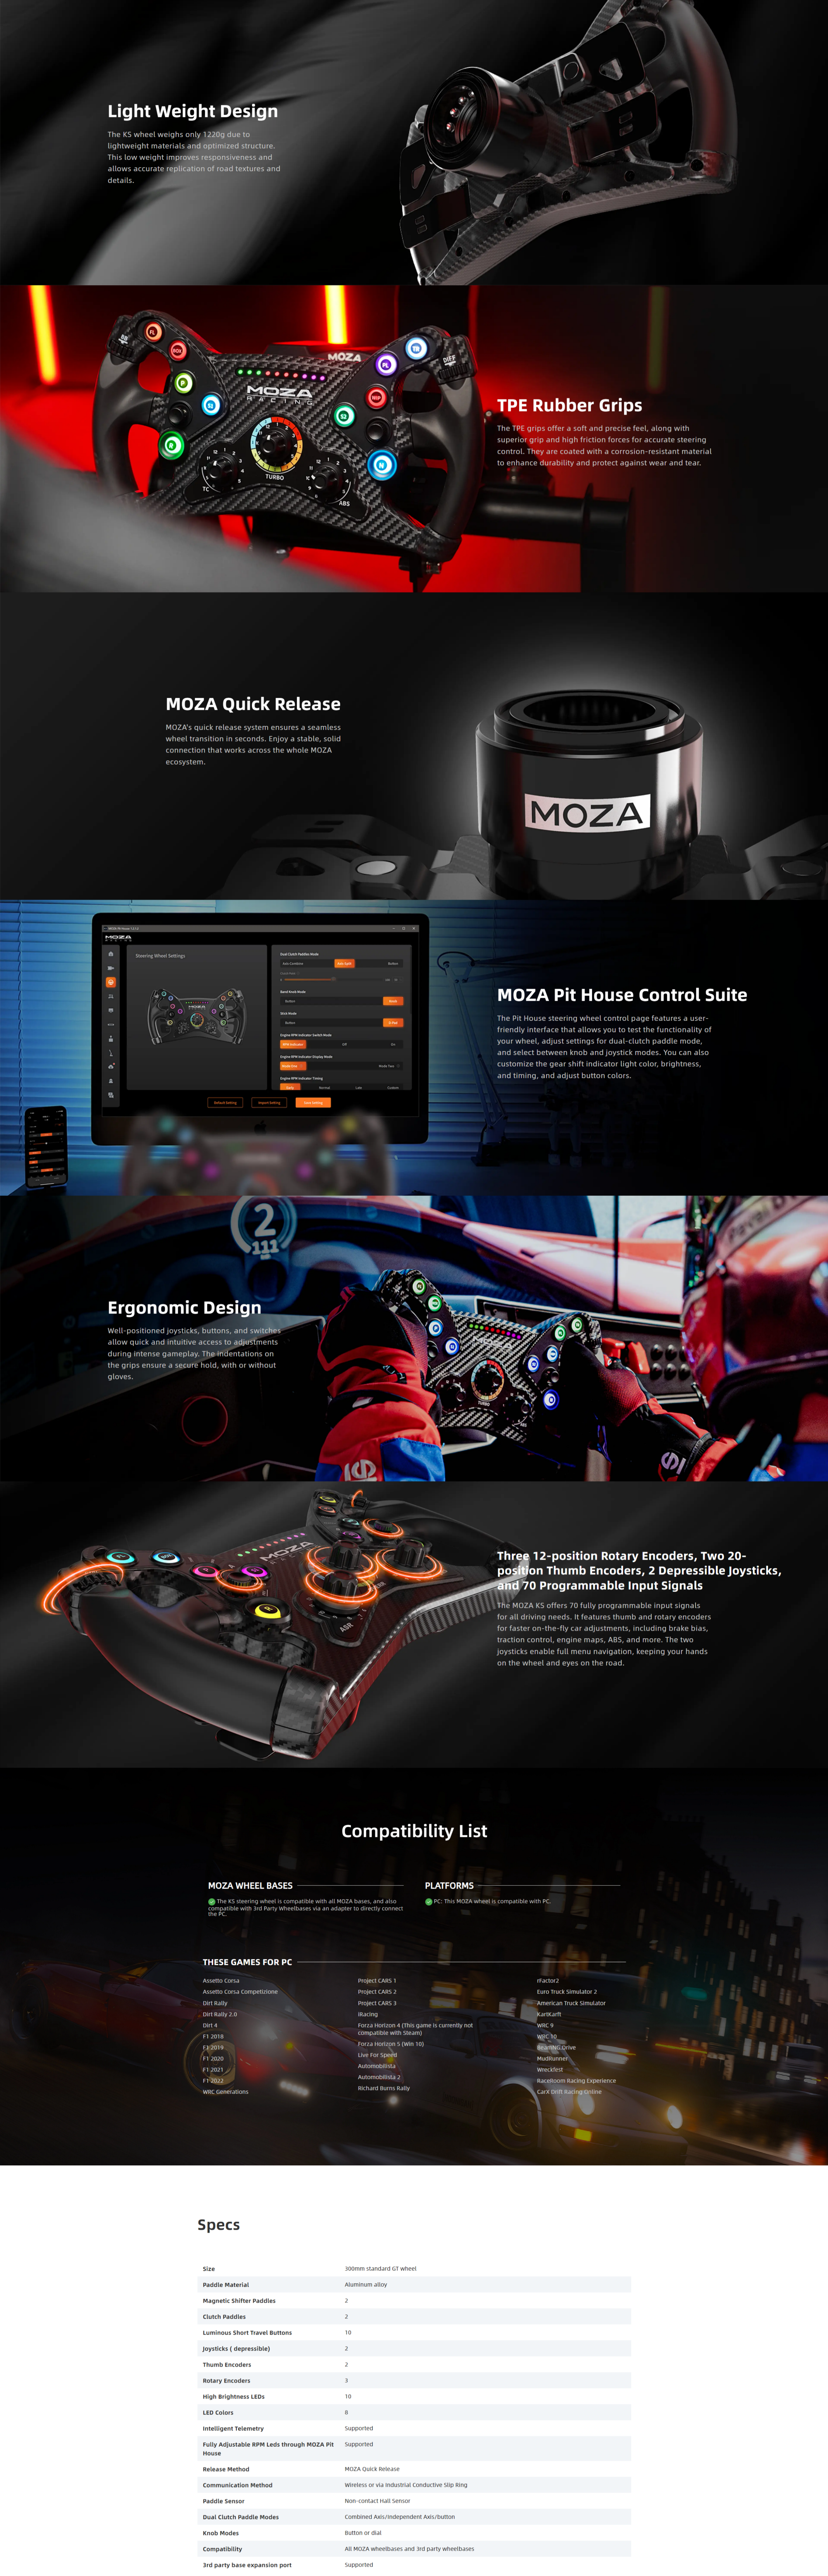 A large marketing image providing additional information about the product MOZA KS Formula Steering Wheel - Additional alt info not provided